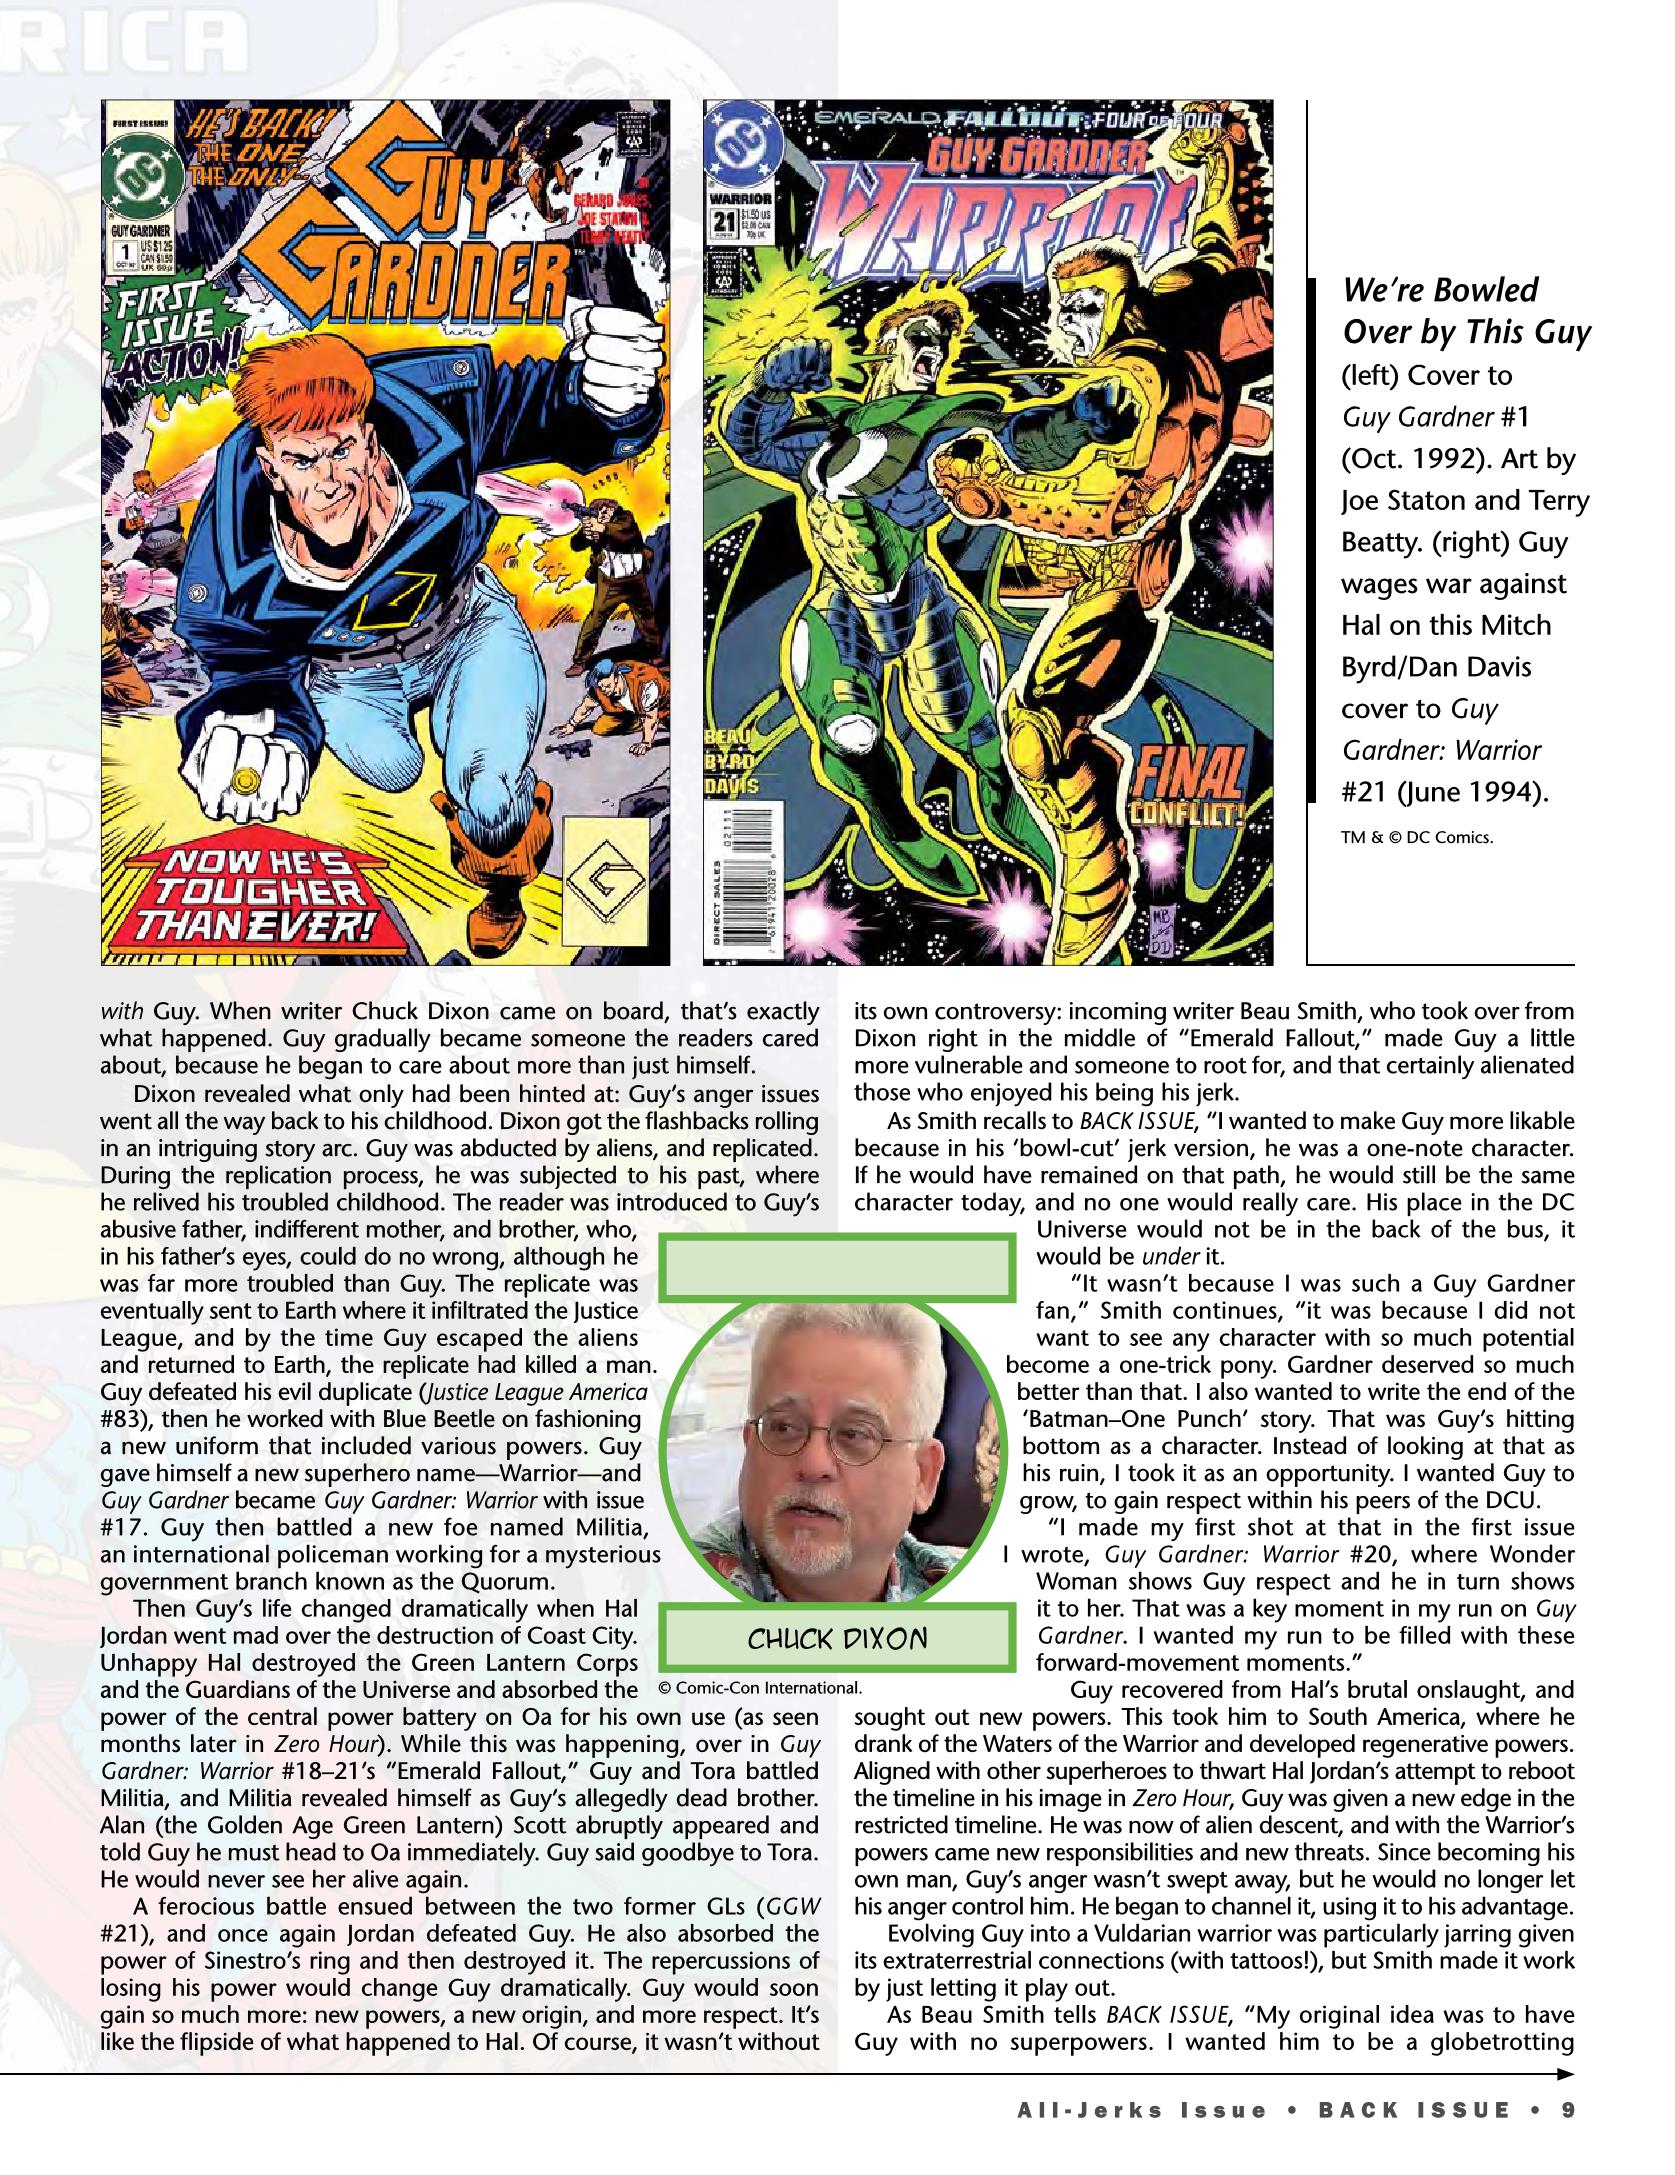 Read online Back Issue comic -  Issue #91 - 3